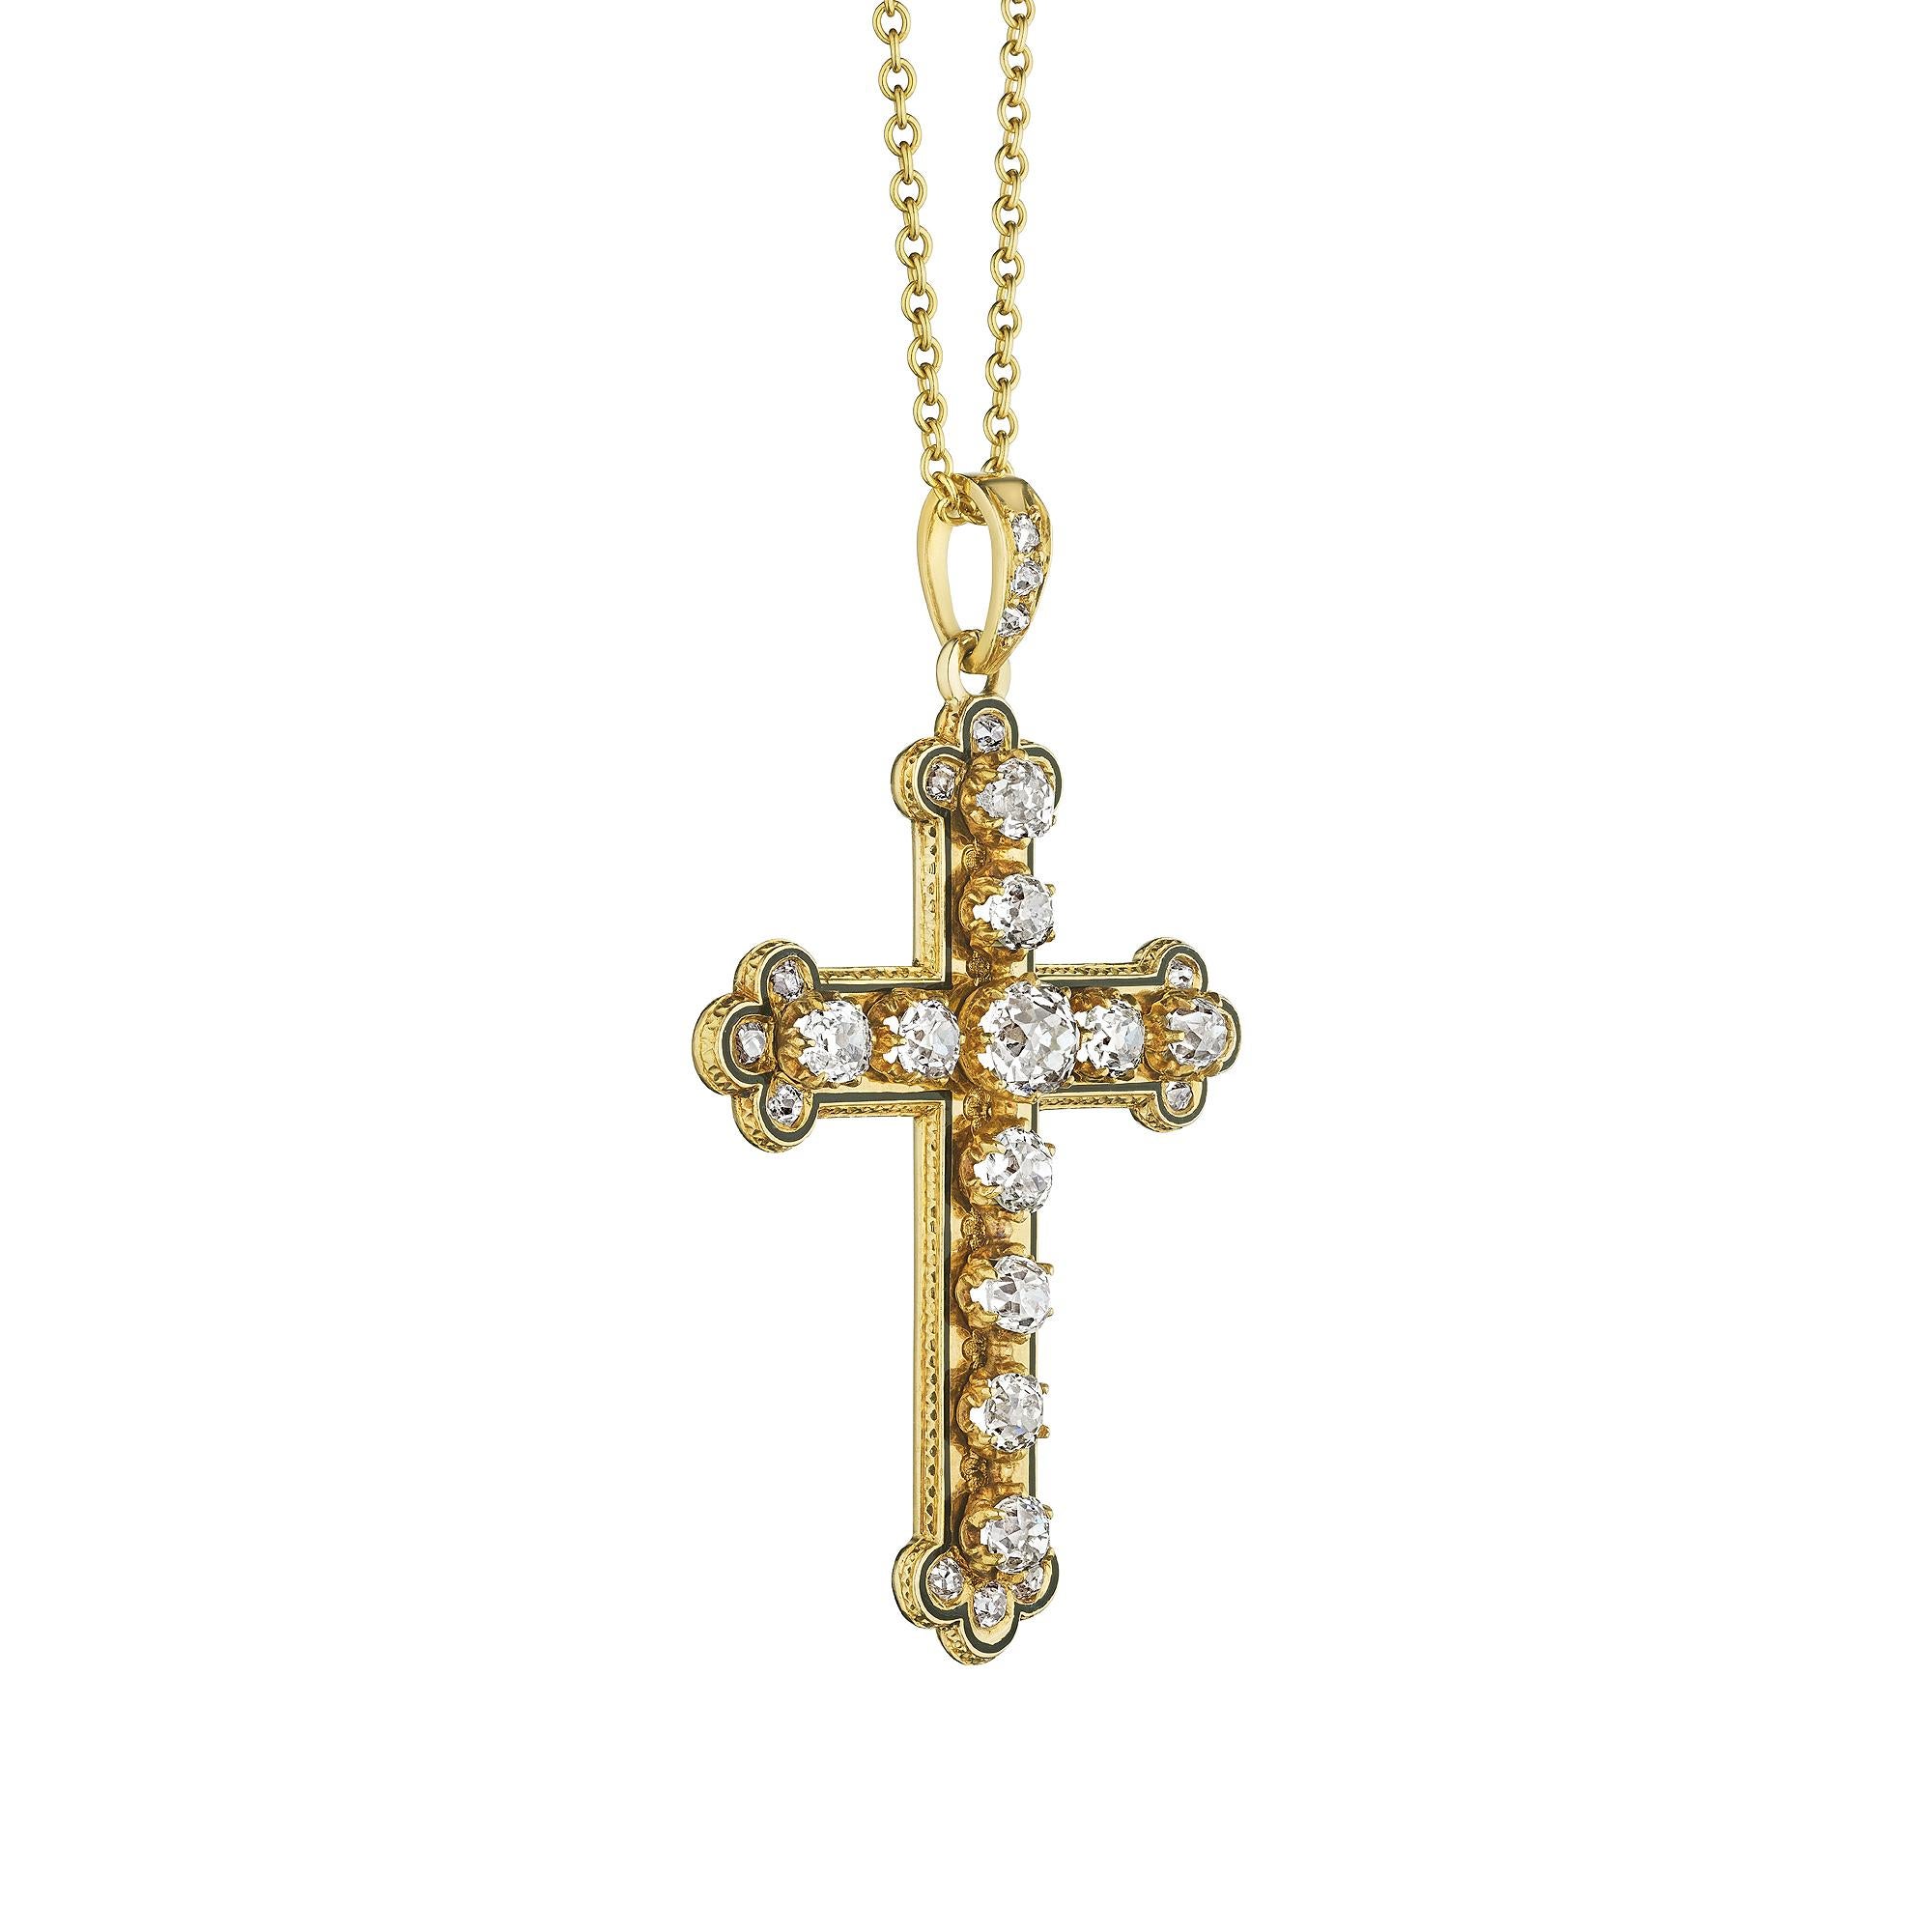 Beautifully lit up with 11 large cushion cut diamonds and 12 side diamonds, this Victorian handmade black enamel and 18 karat yellow gold cross is one-of-a-kind.  Circa 1870.  Total diamond weight is approximately 2.00 carats.  1 9/10